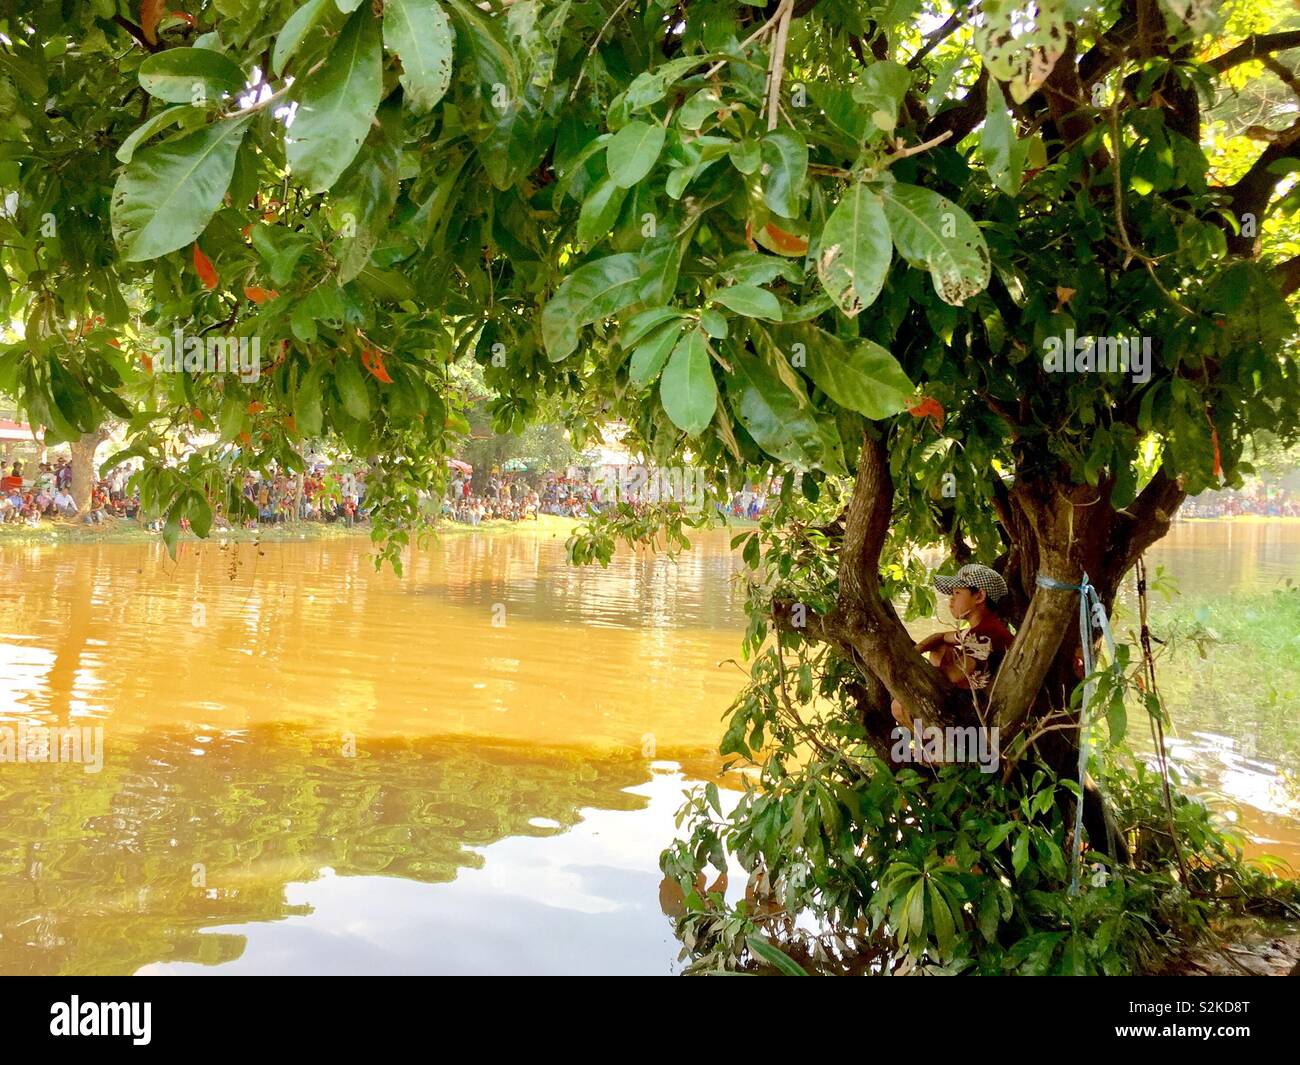 Boy sitting in tree during water festival, Siem Reap, cambodia Stock Photo